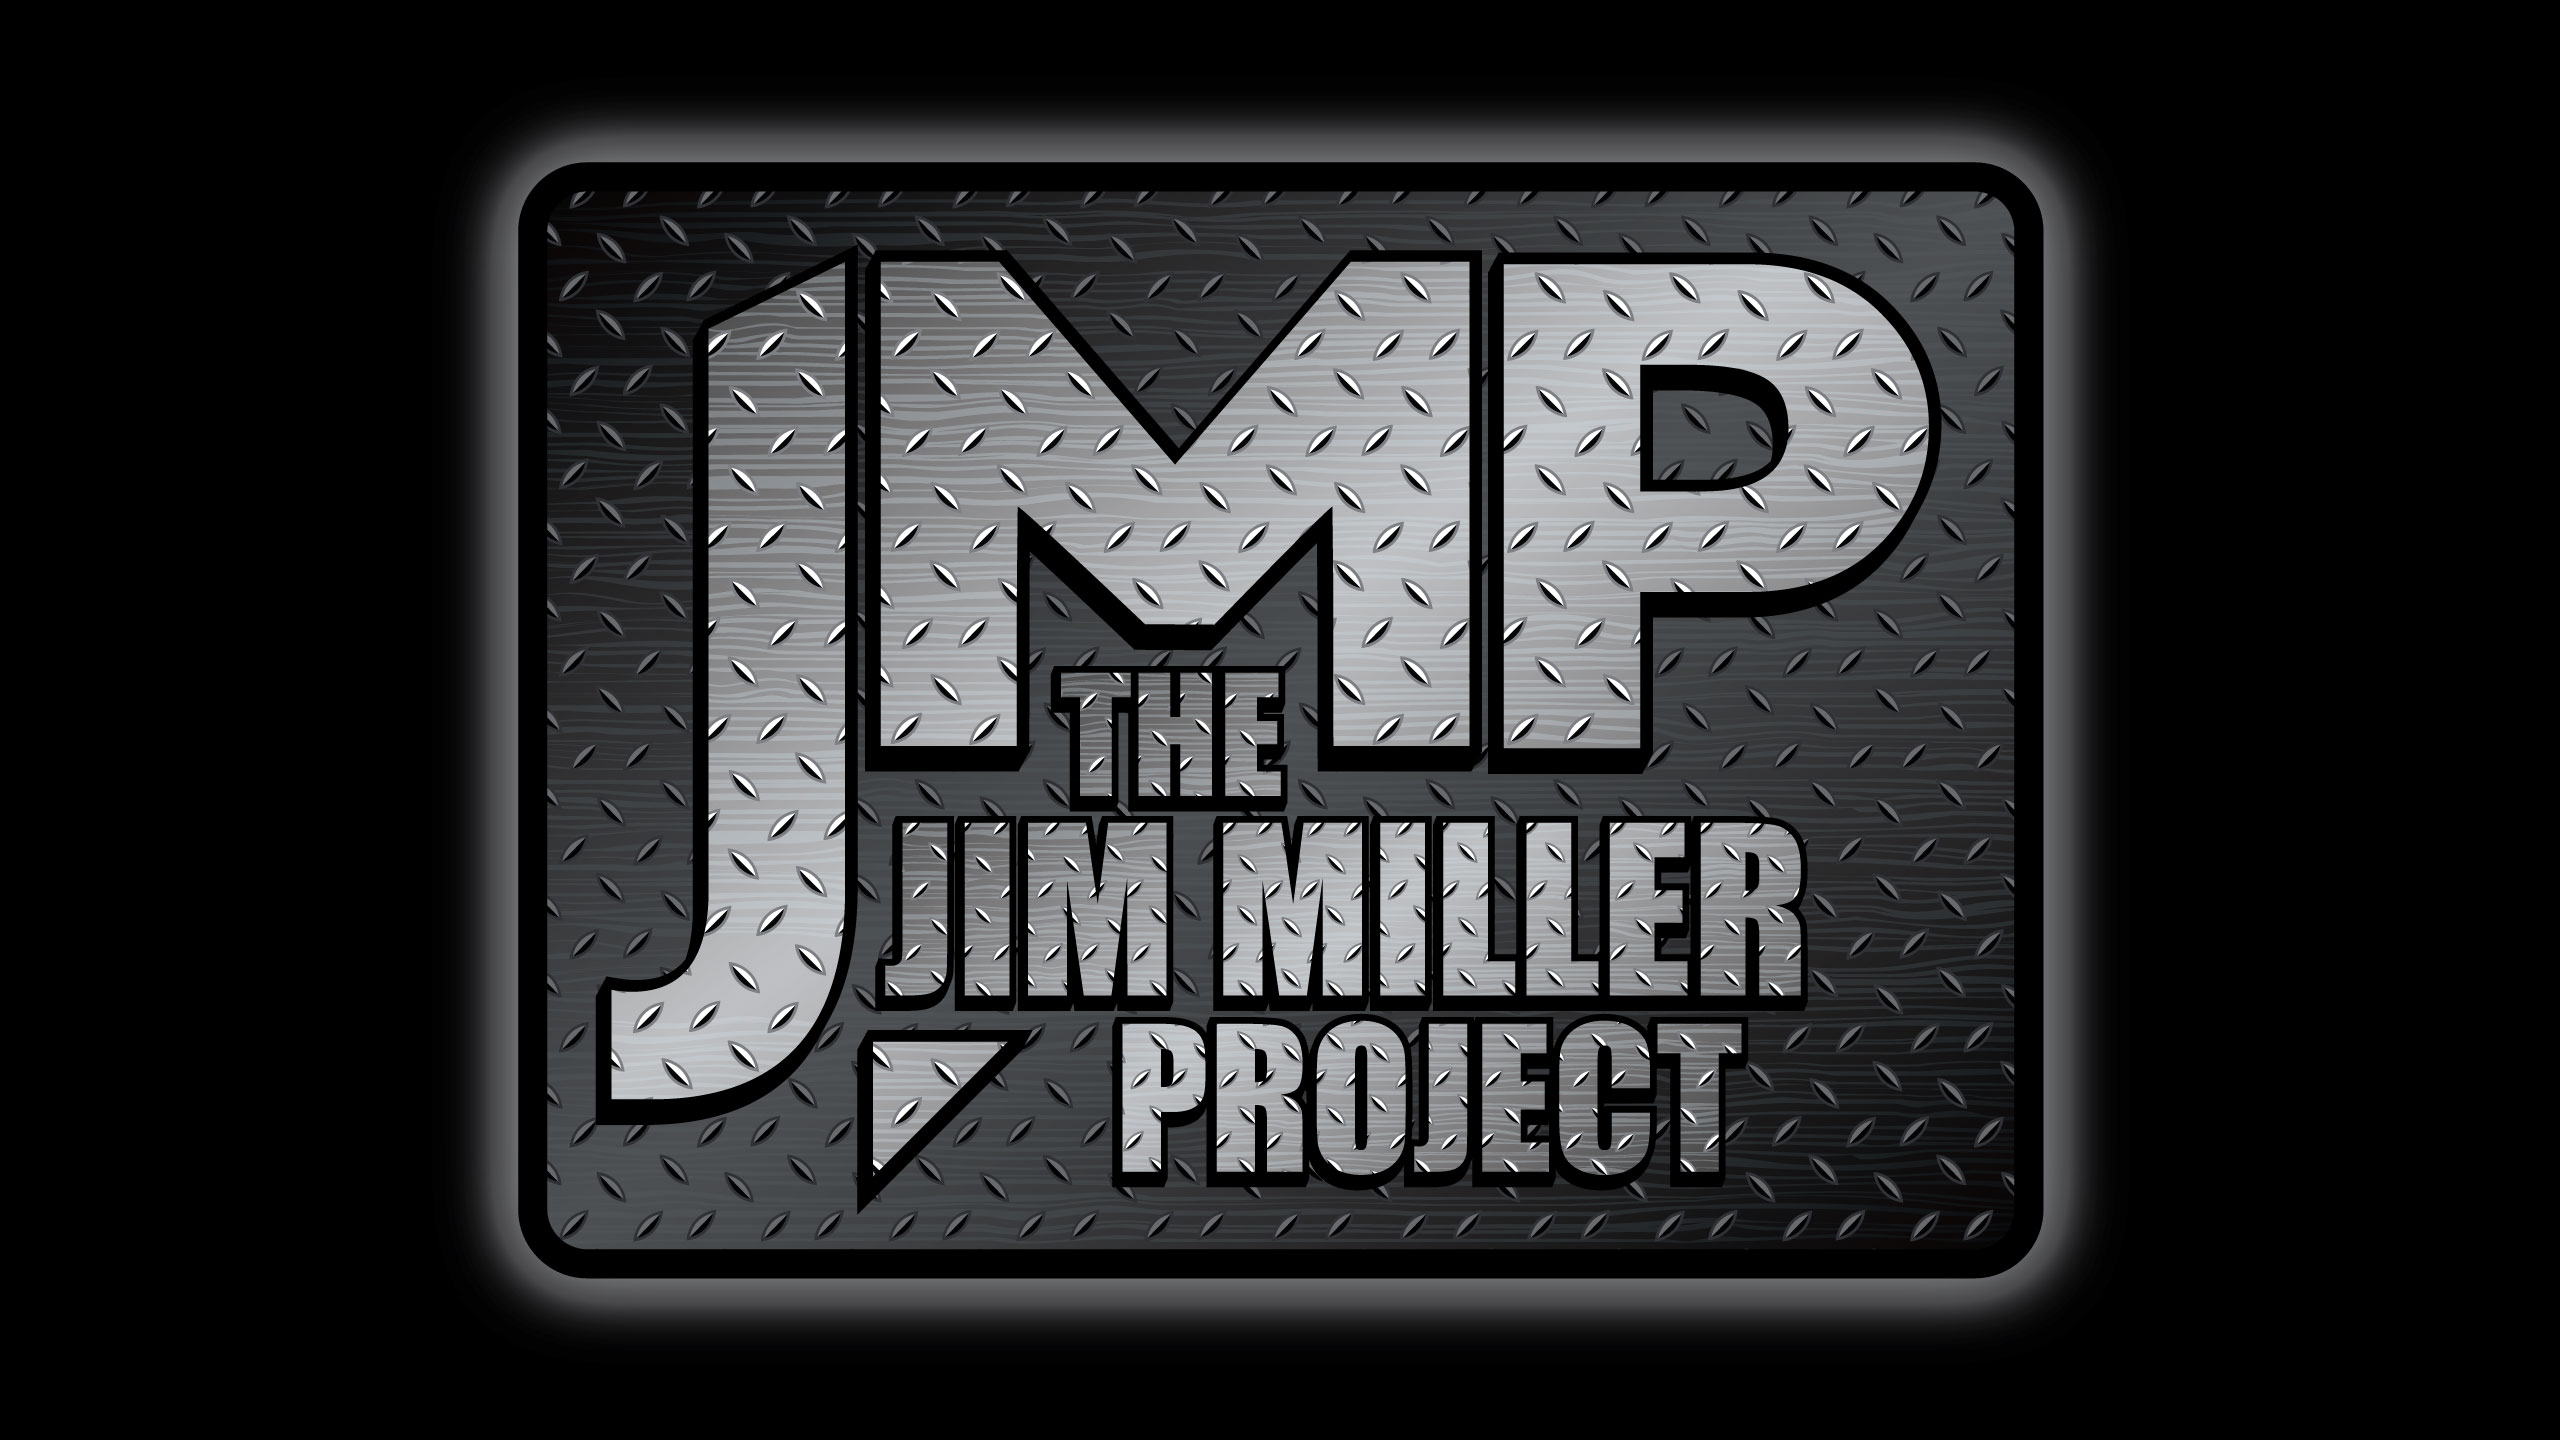 The Jim Miller Project